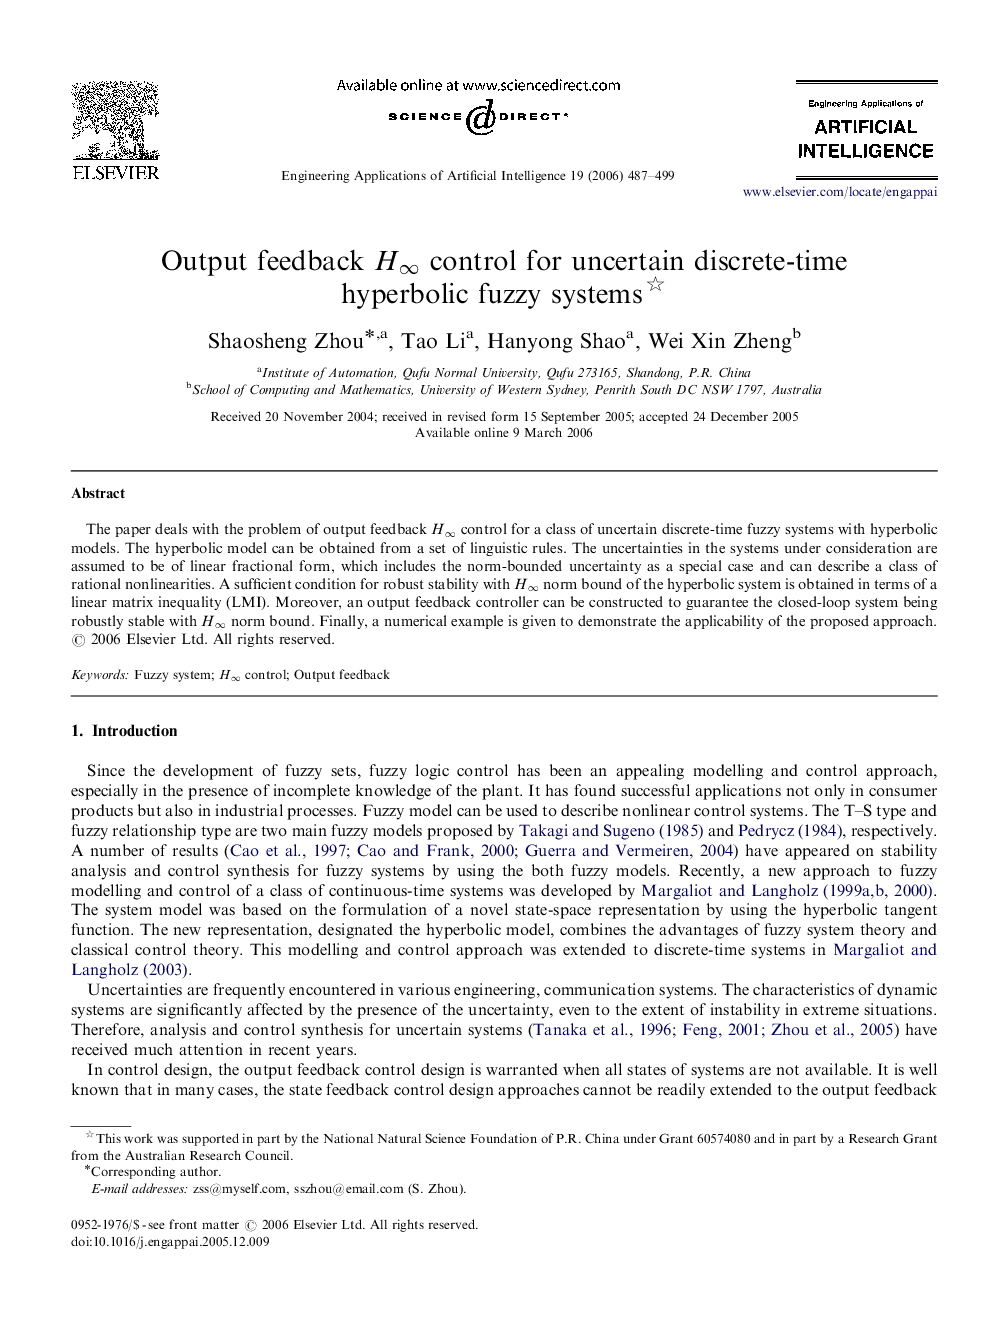 Output feedback H∞H∞ control for uncertain discrete-time hyperbolic fuzzy systems 